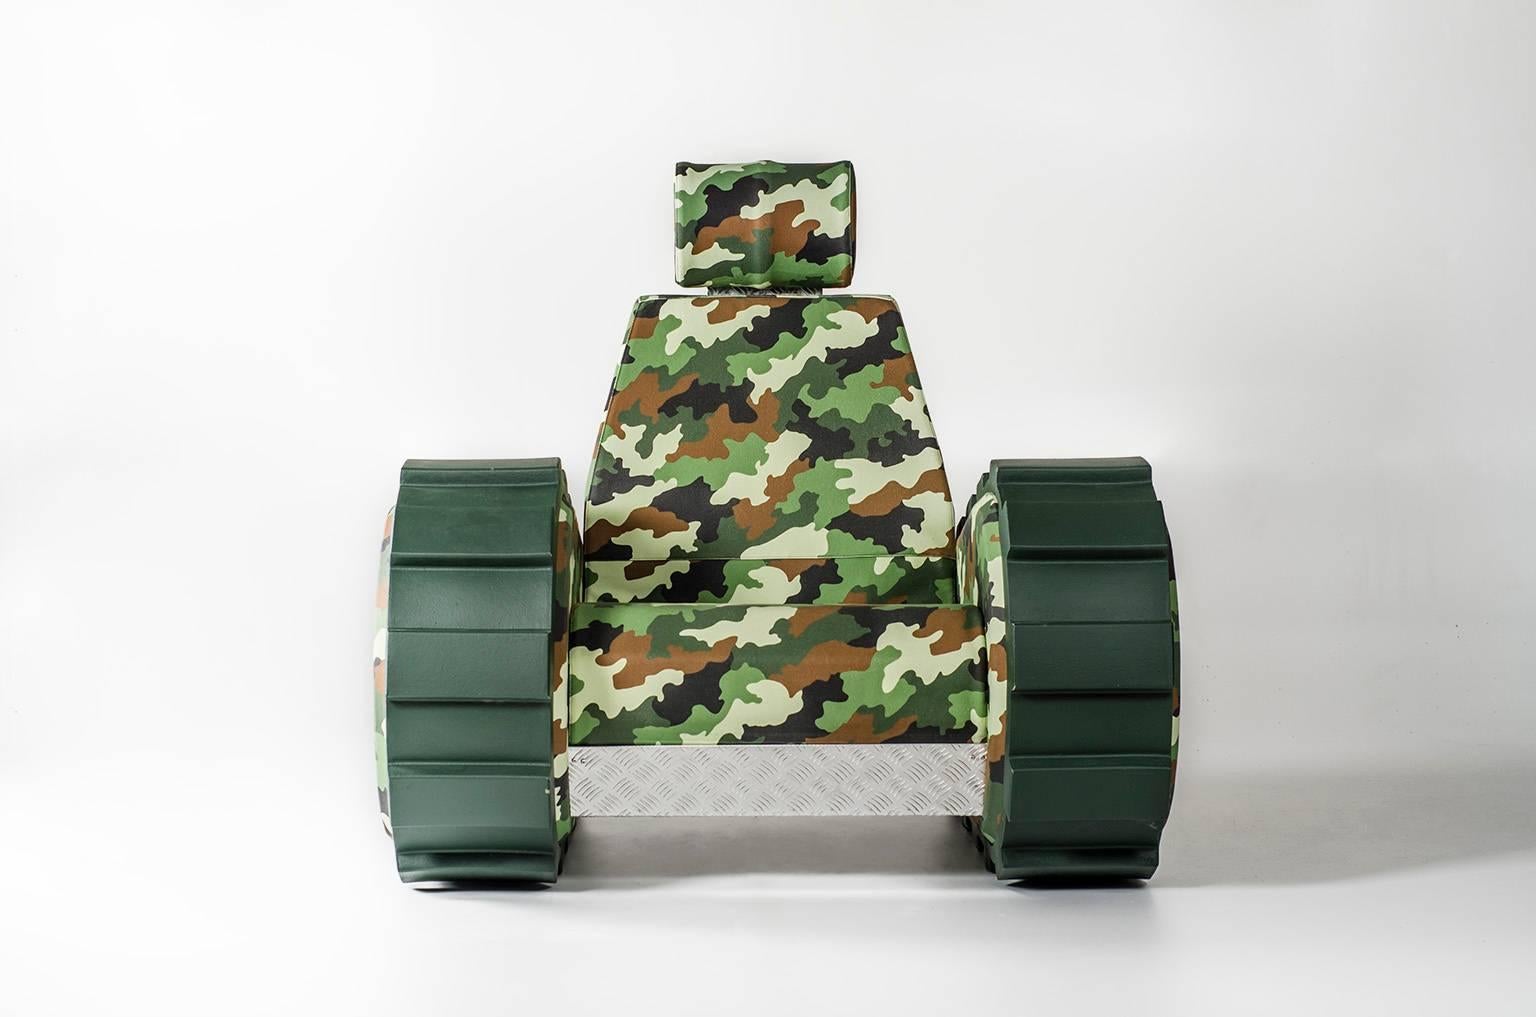 The military symbols turn in to peace messages.
An harmless tank that loose his war instinct , that in a funny way become a big cosy seat.
Three versions of the Armrest and Girdle personalize the Armychair, for the best expression, of the